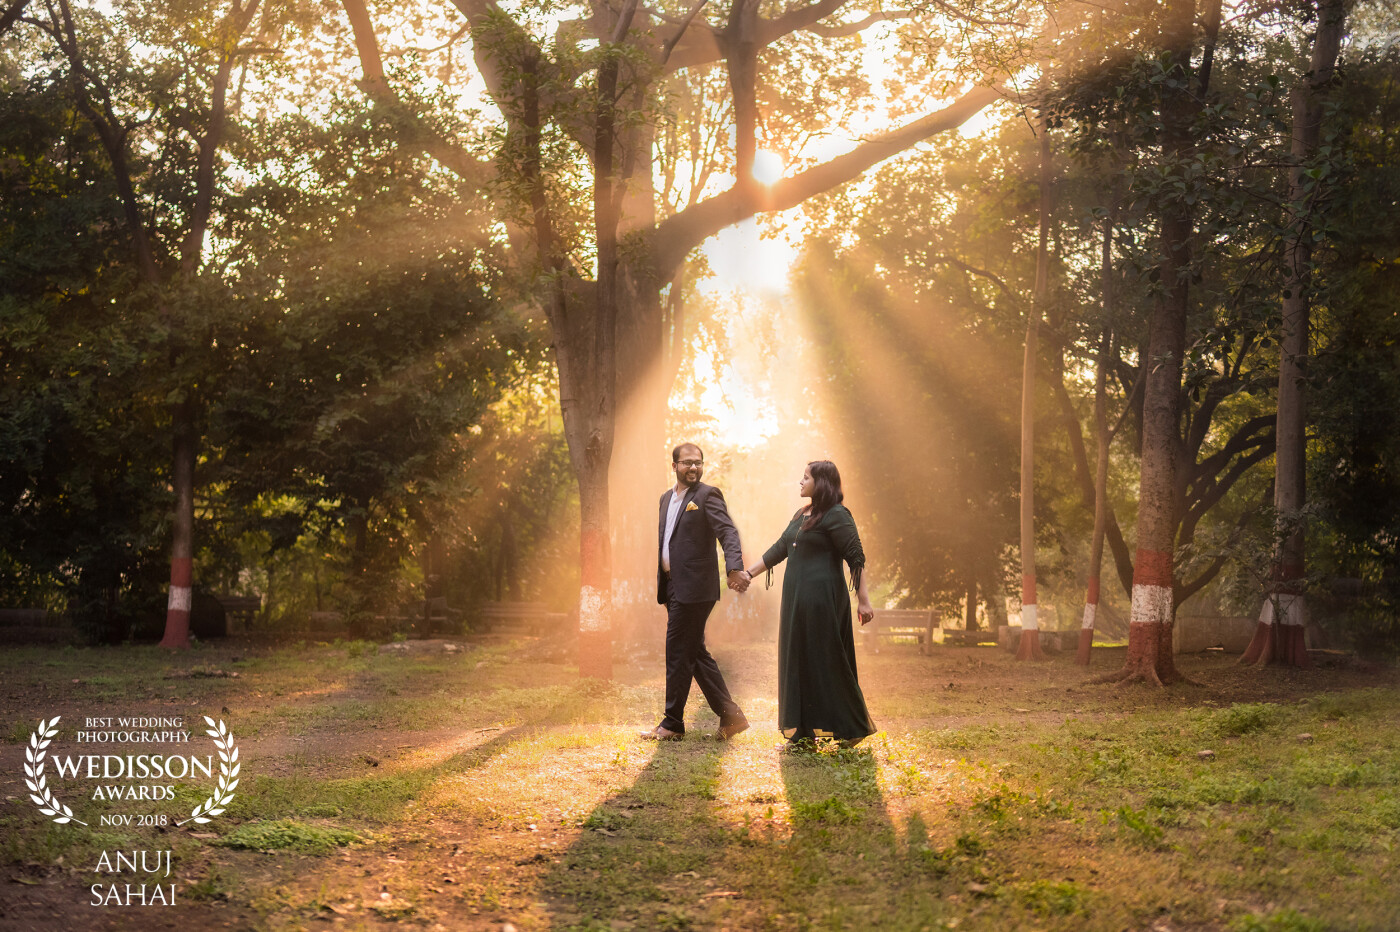 I went with the couple early in the morning basically to avoid crowds. While I was photographing the couple, I saw golden sunlight peeking through the trees. Rather than a typical couples pose, I went for "leading the way" shot and the golden light just adds spice to the photograph.